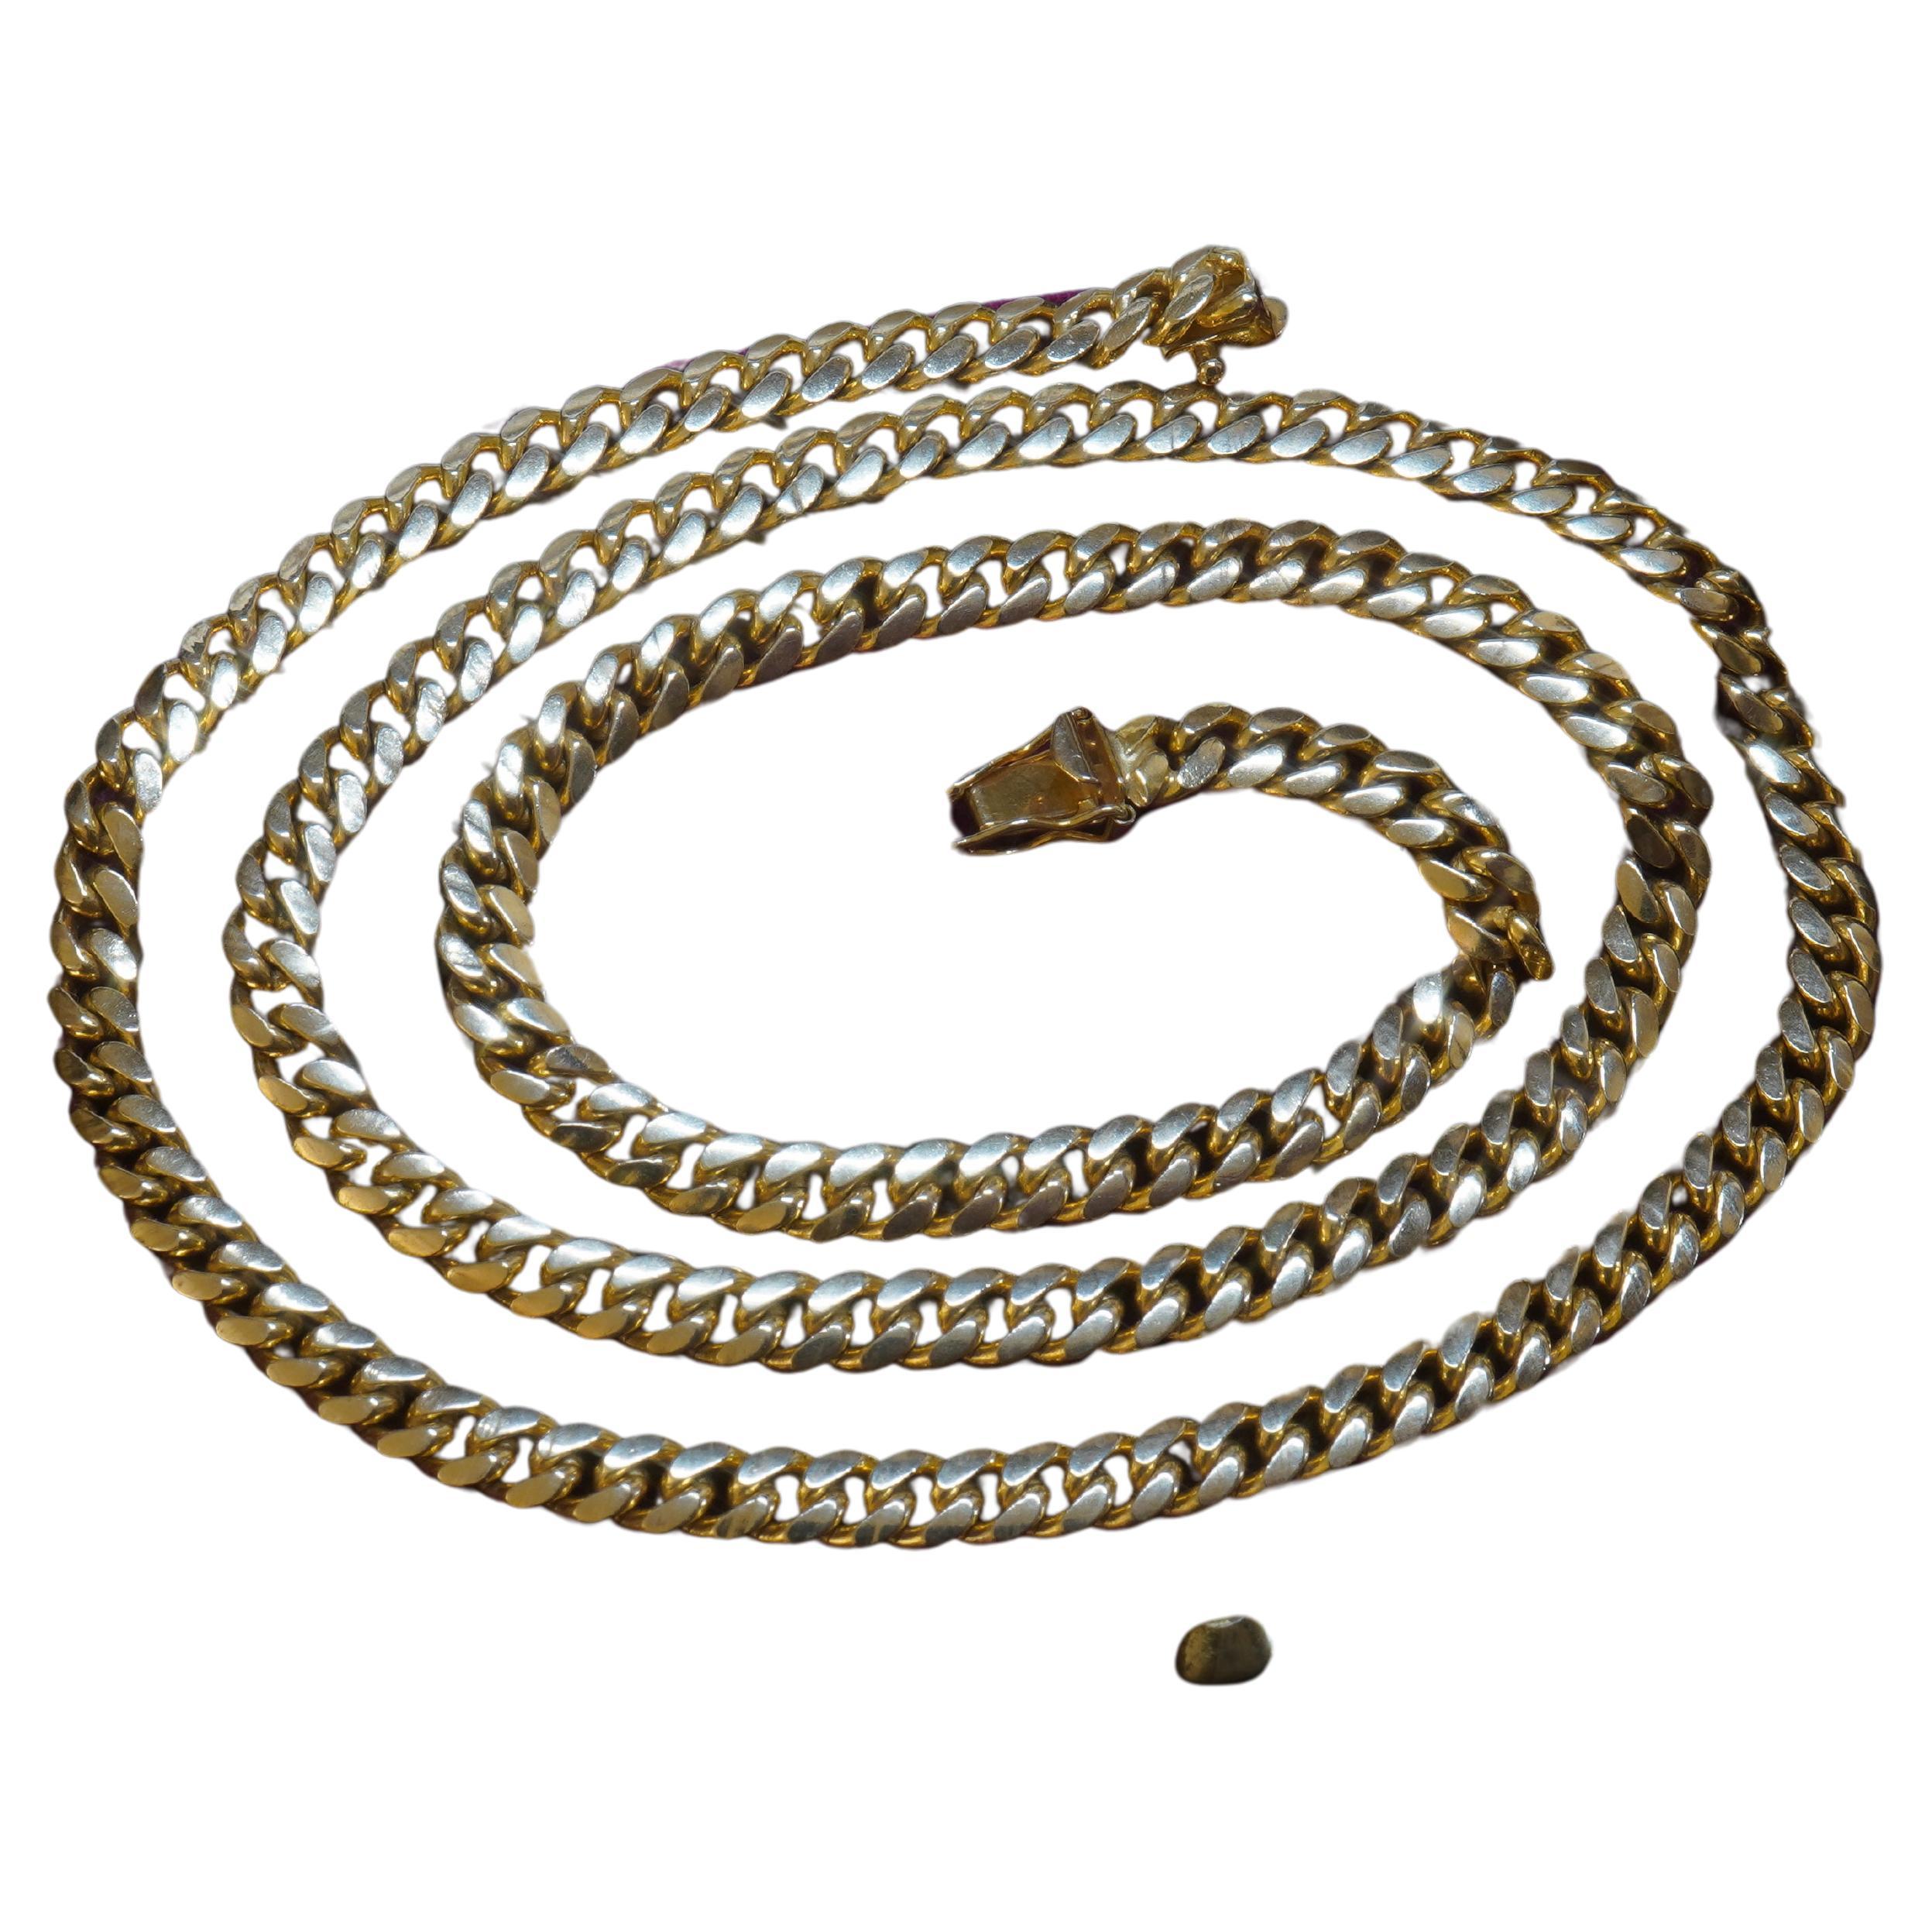 Old South Jewels proudly presents...HEAVY 14K SOLID GOLD VINTAGE CUBAN LINK NECKLACE!   

This Classy Necklace Is Lovely With Any Outfit.   Thick and Heavy Solid Gold.   Suitable for Man Or Woman.    

This Gorgeous Necklace in a Luxurious Heavy